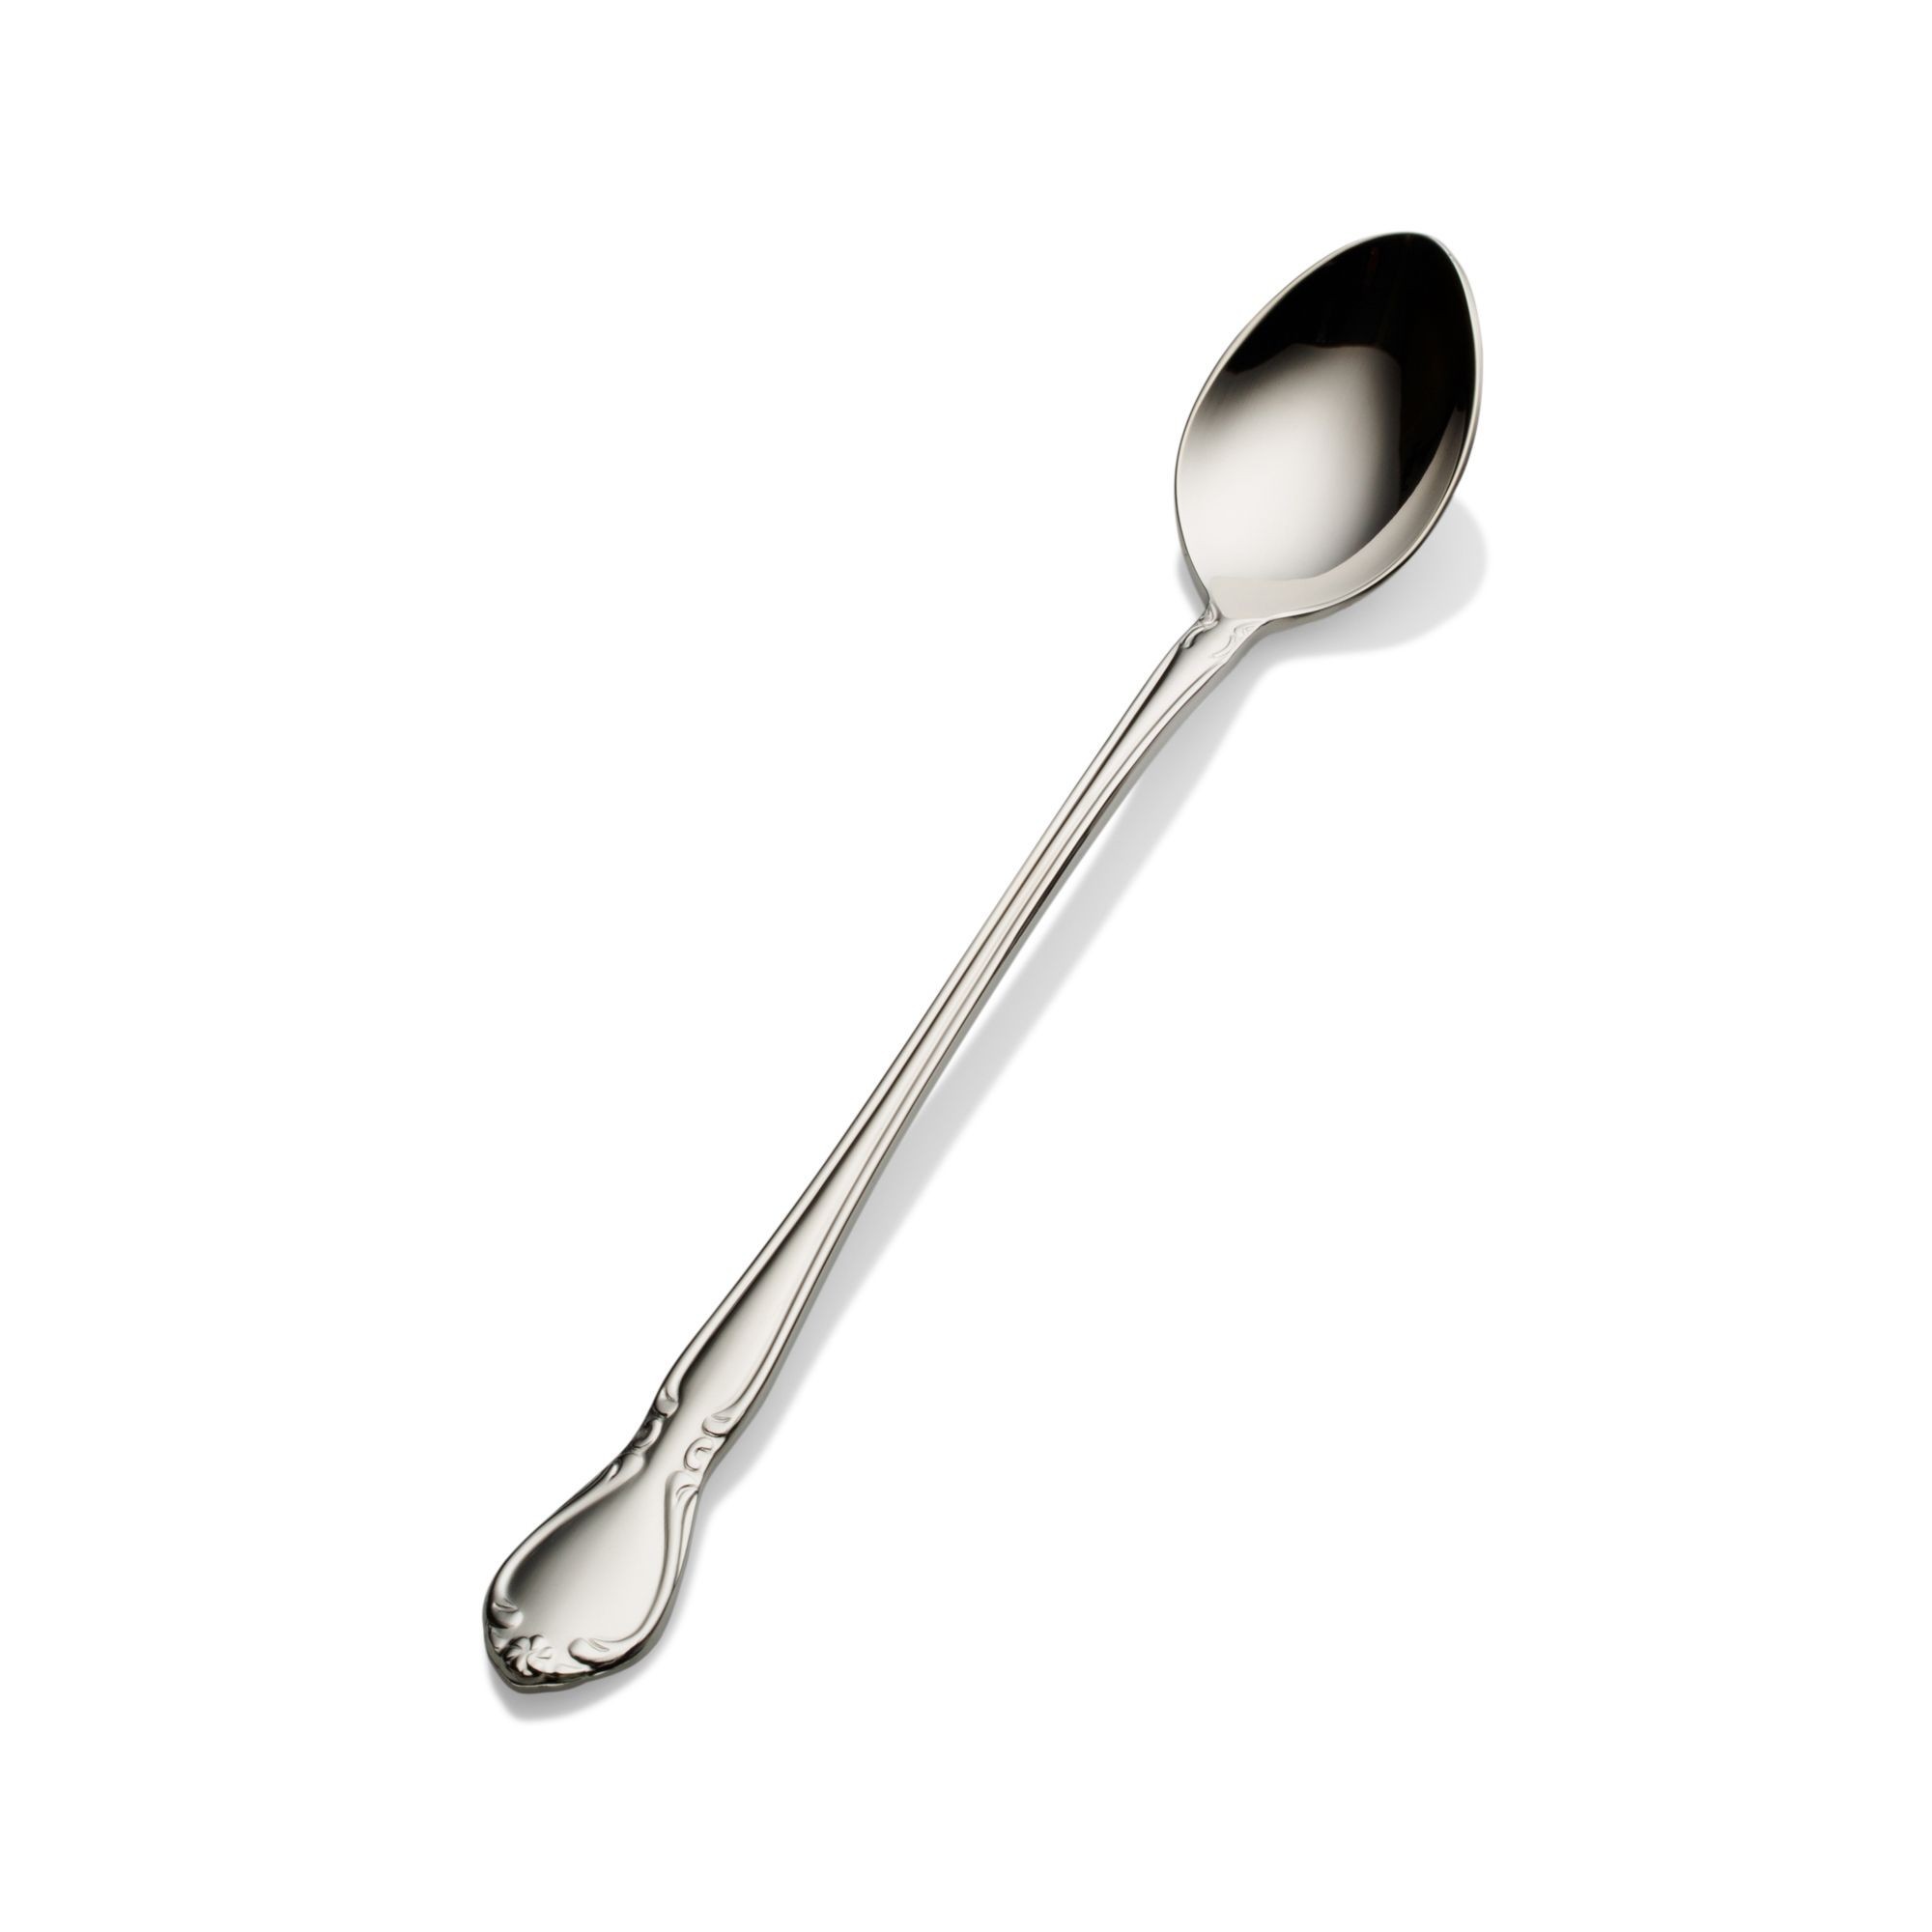 Bon Chef S1802S Queen Anne 18/8 Stainless Steel  Iced Tea Spoon